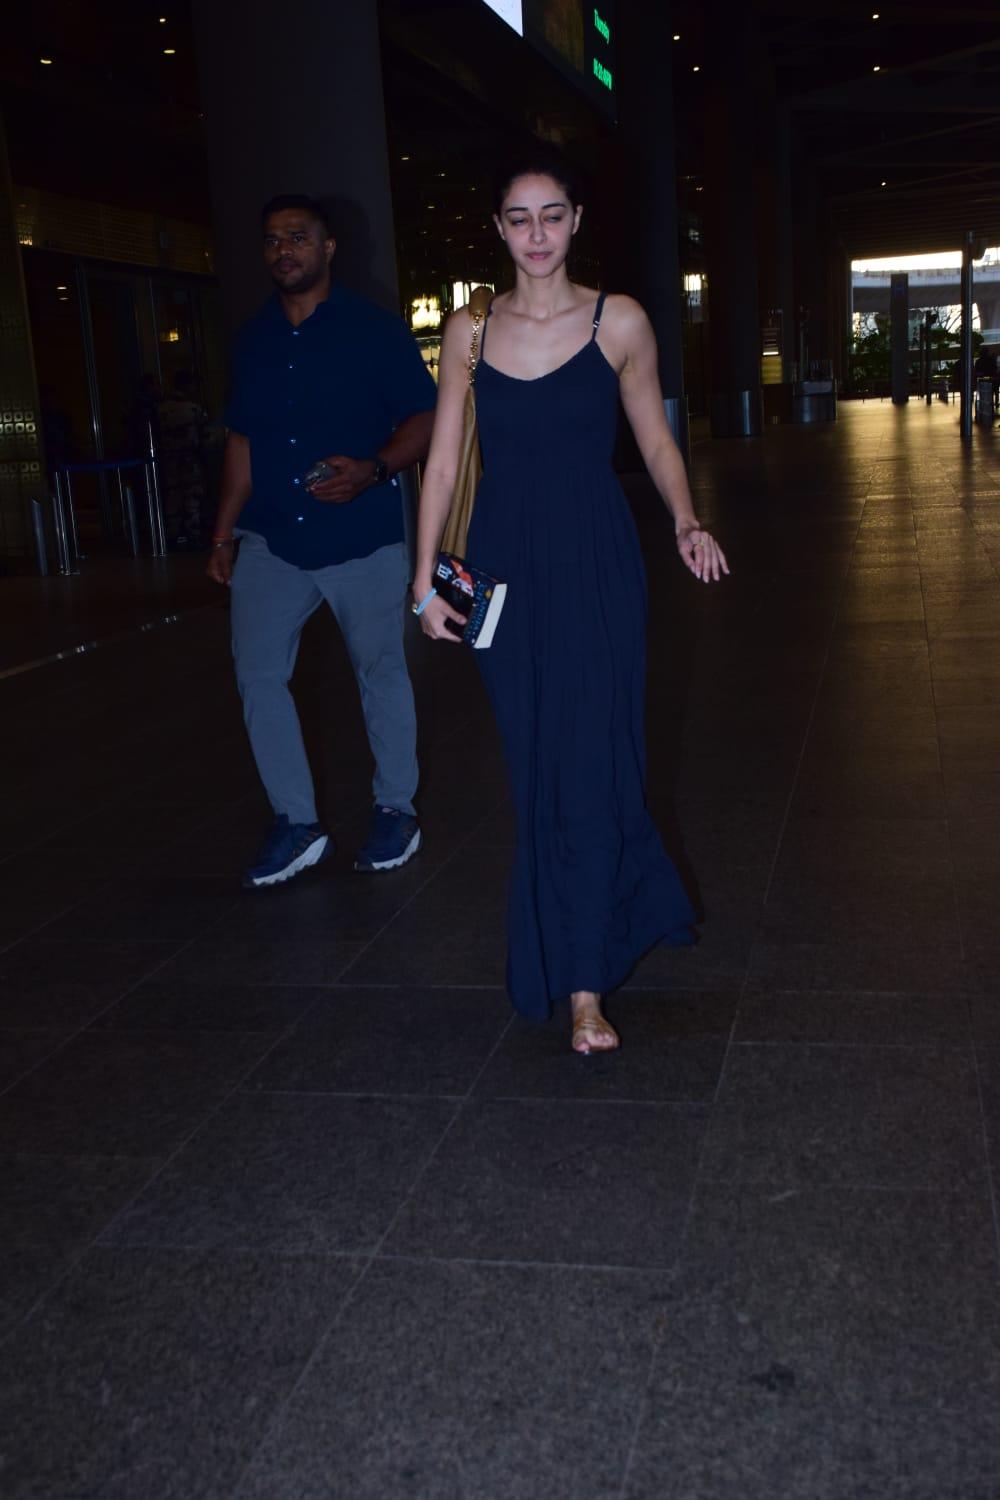 Ananya Panday was spotted at the Mumbai airport returning from Goa. She opted for comfy blue slip dress for her travels